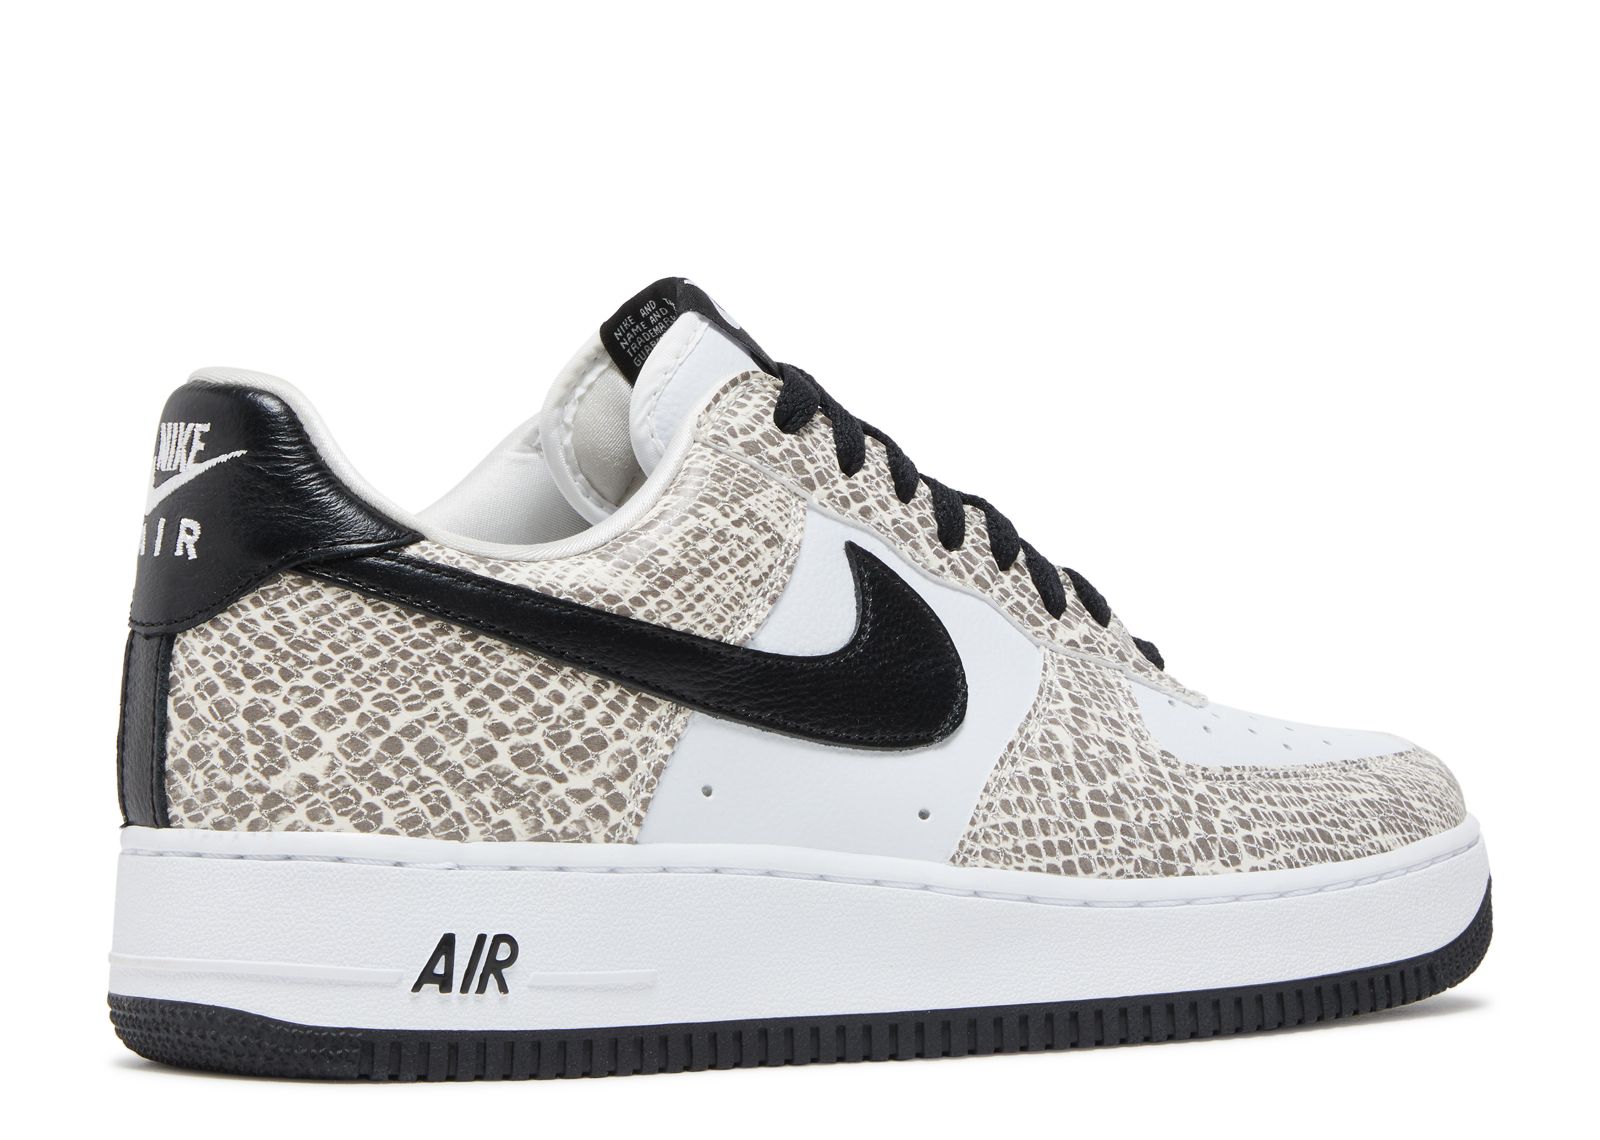 Air Force 1 Low 'Cocoa Snake' 2018 - Nike - 845053 104 - true 